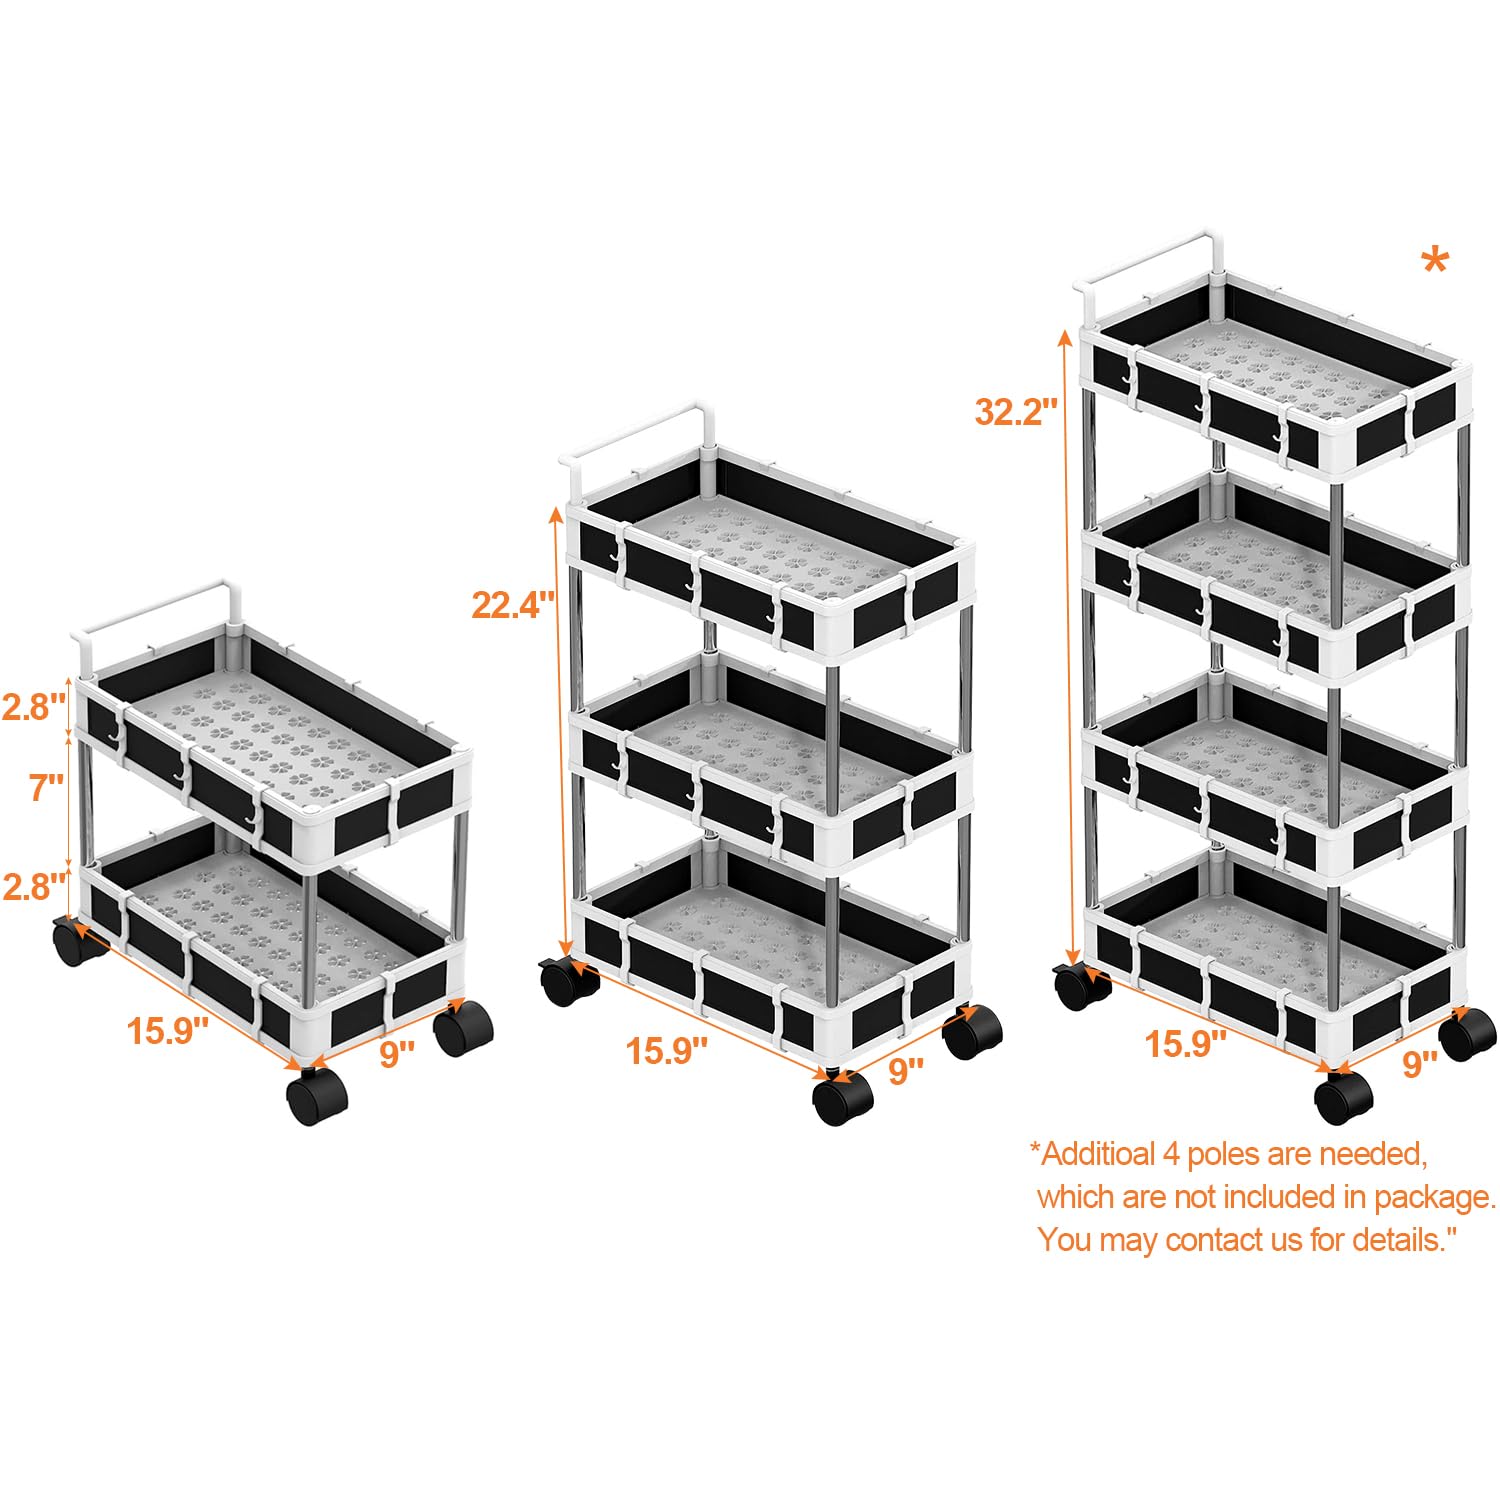 NUNET Under Sink Organizer w. Locking Casters & Handle 2/3/4 Tier Adjustable Small Rolling Cart Cabinet Storage Large Capacity Moving Cart w. Wheels for Kitchen, Bathroom, Countertop (2 Pack 2 Tier)